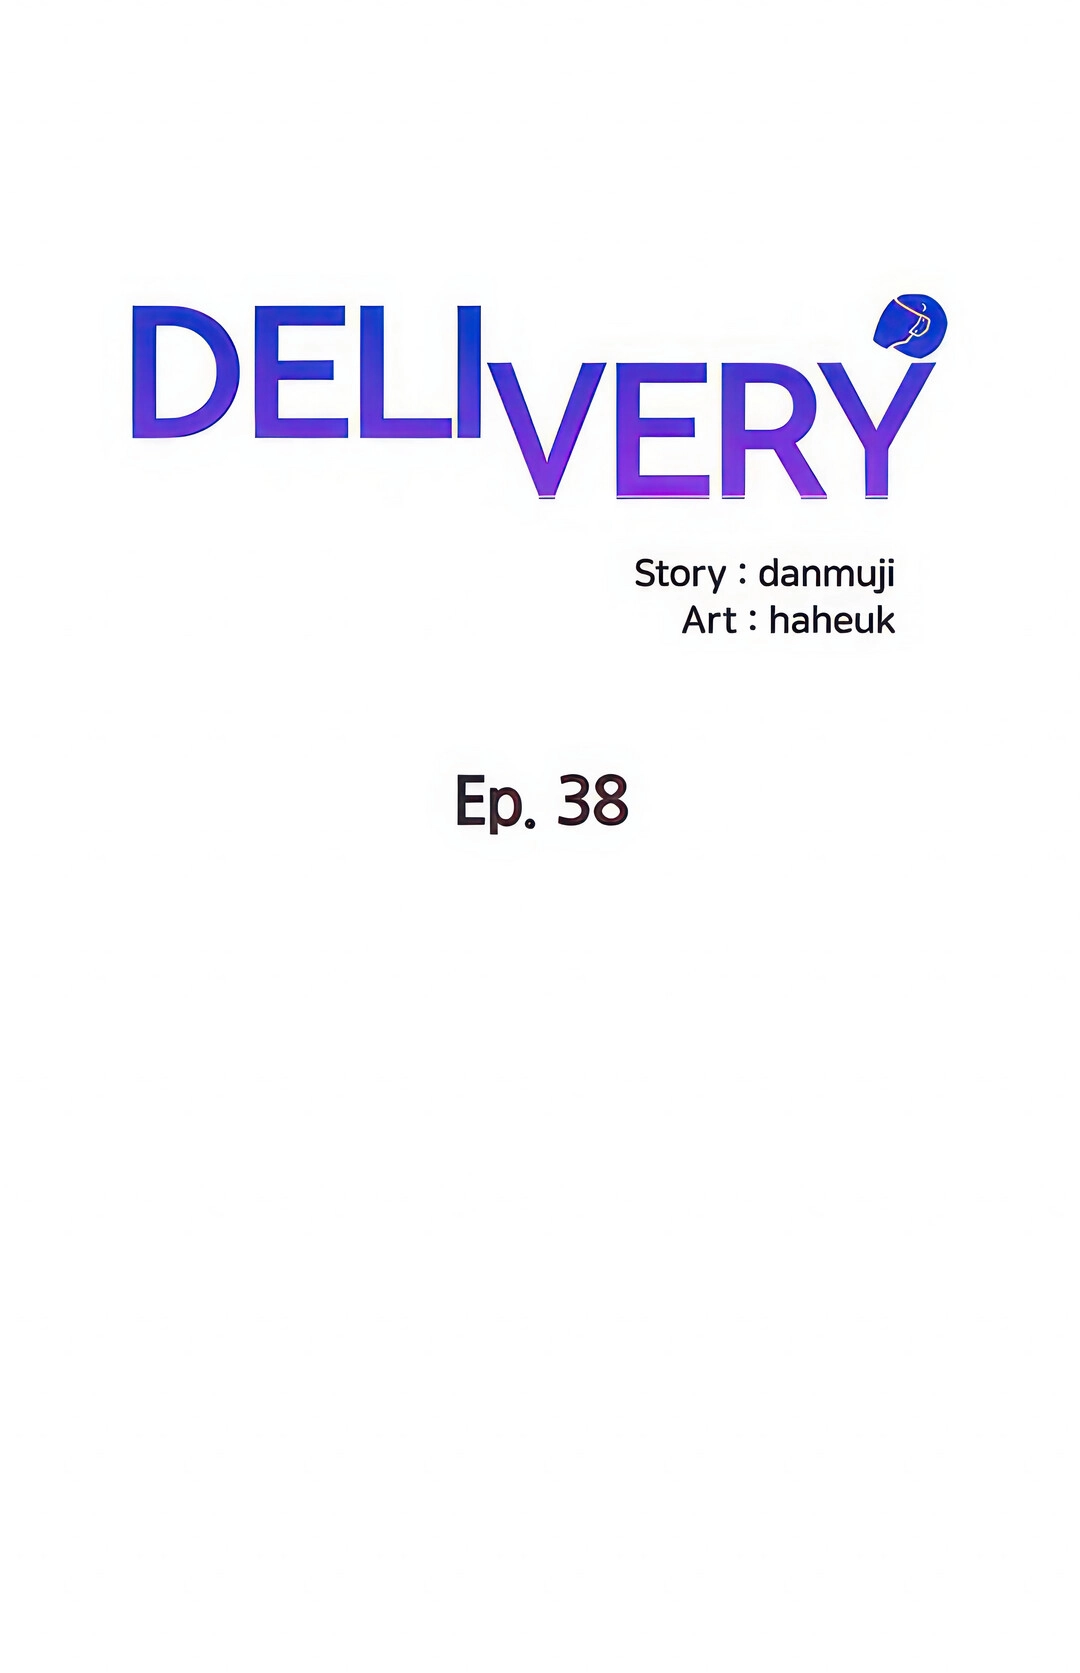 DELIVERY image